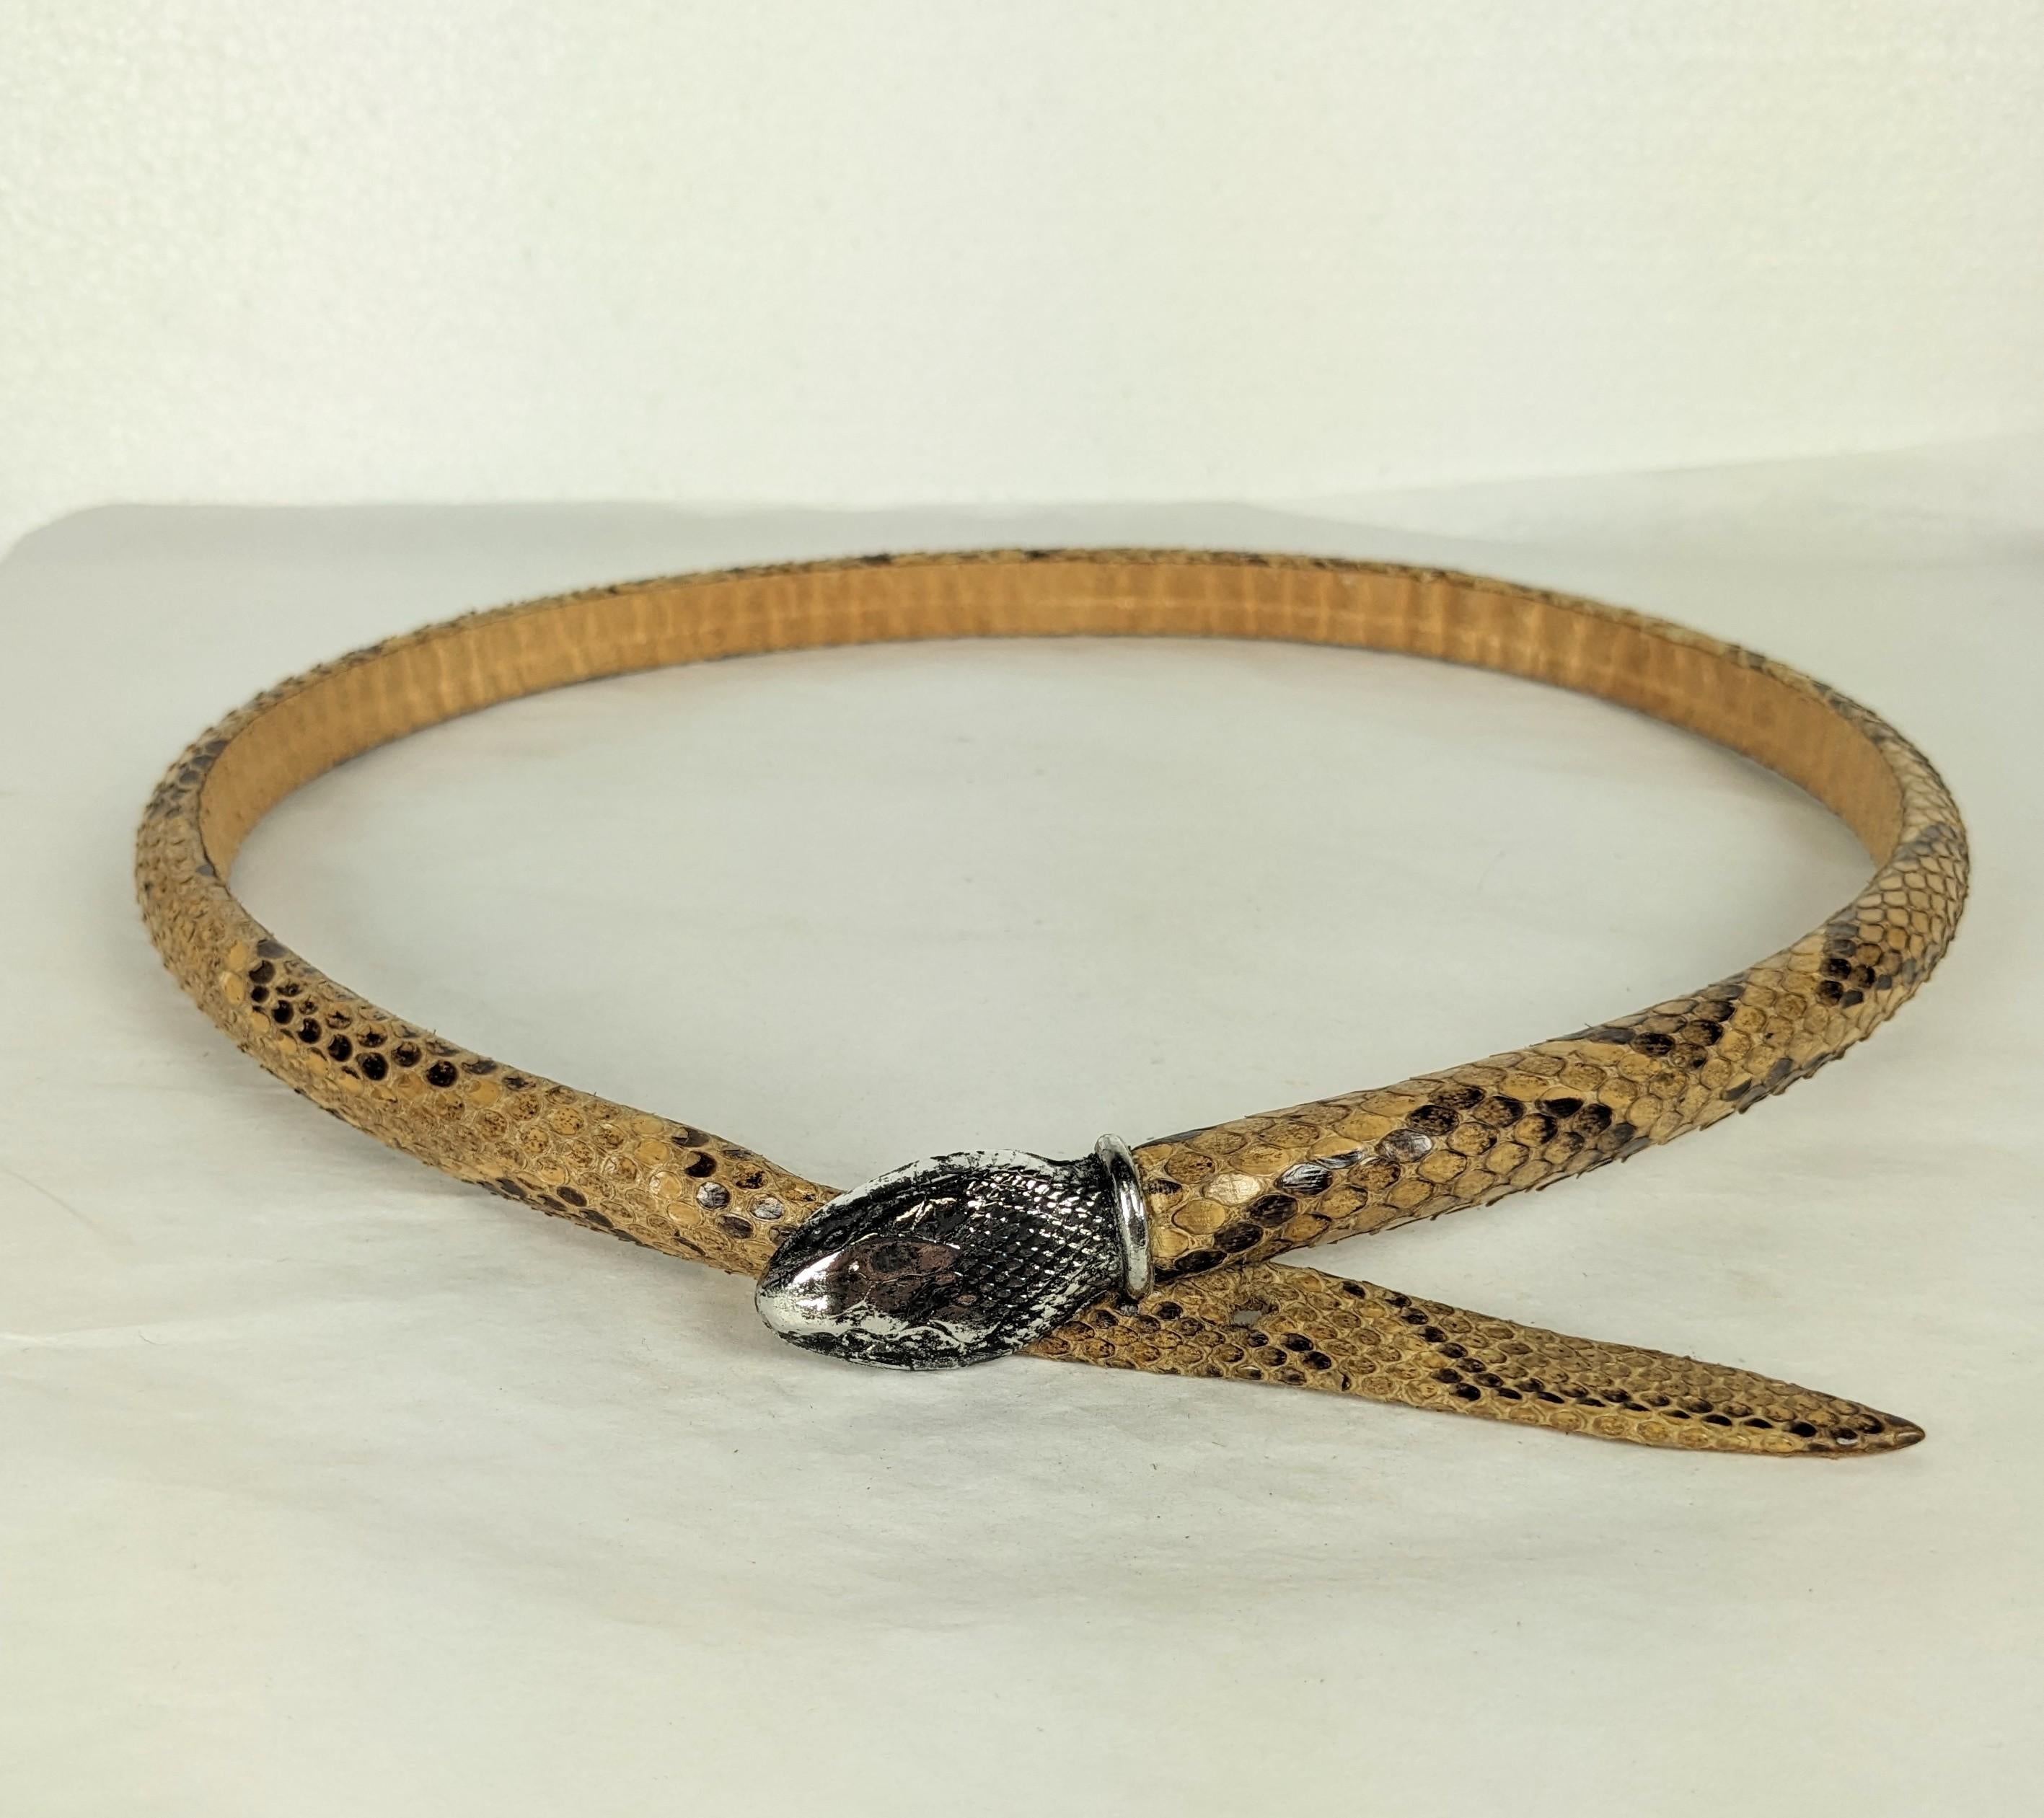 Rare Yves Saint Laurent Haute Couture snake skin belt from the 1970s. Padded to be 3 dimensional and set with a silvered bronze snake head which serves as the clasp. Unlabeled HC from an important collection of an artisanal Maison who worked for